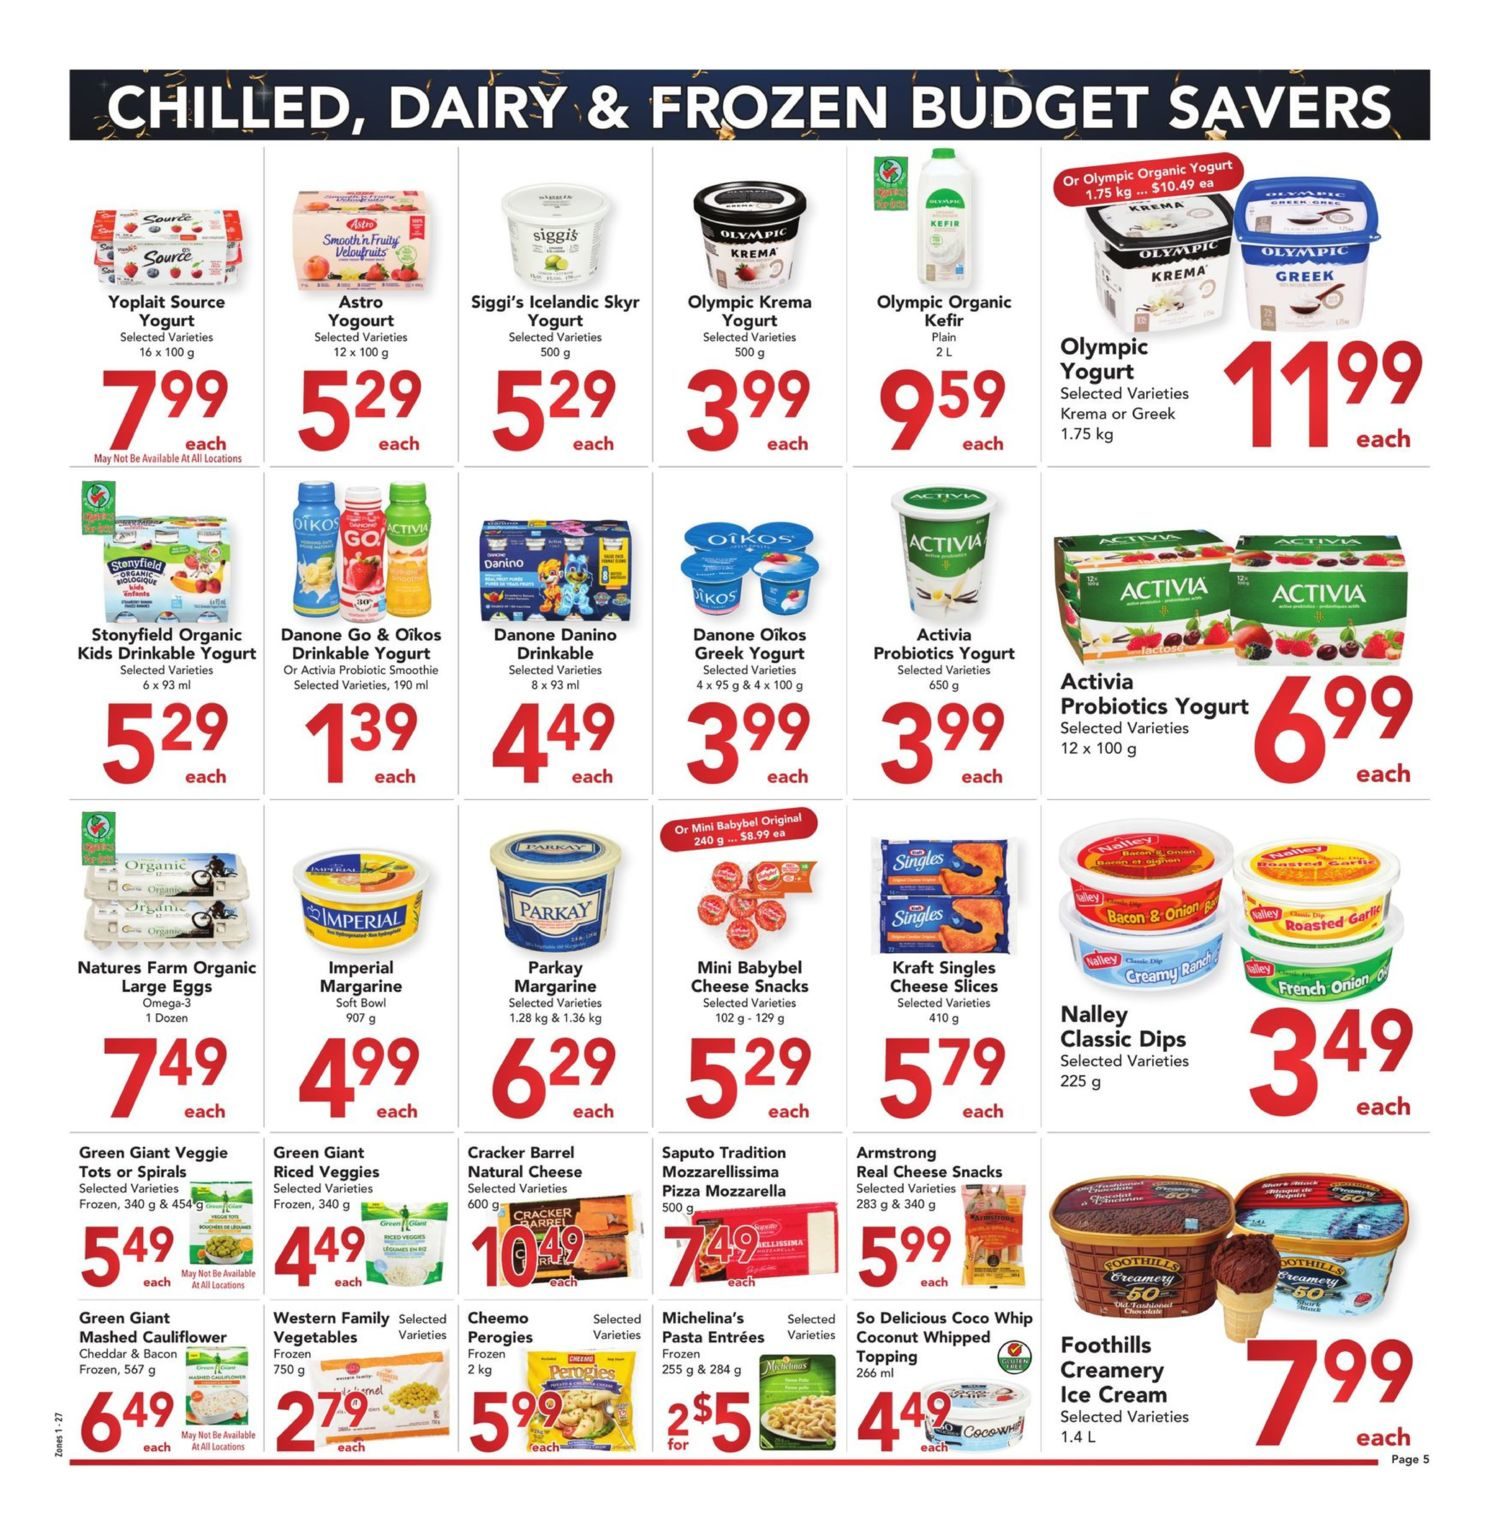 Buy-Low Foods - Budget Savers - Page 5